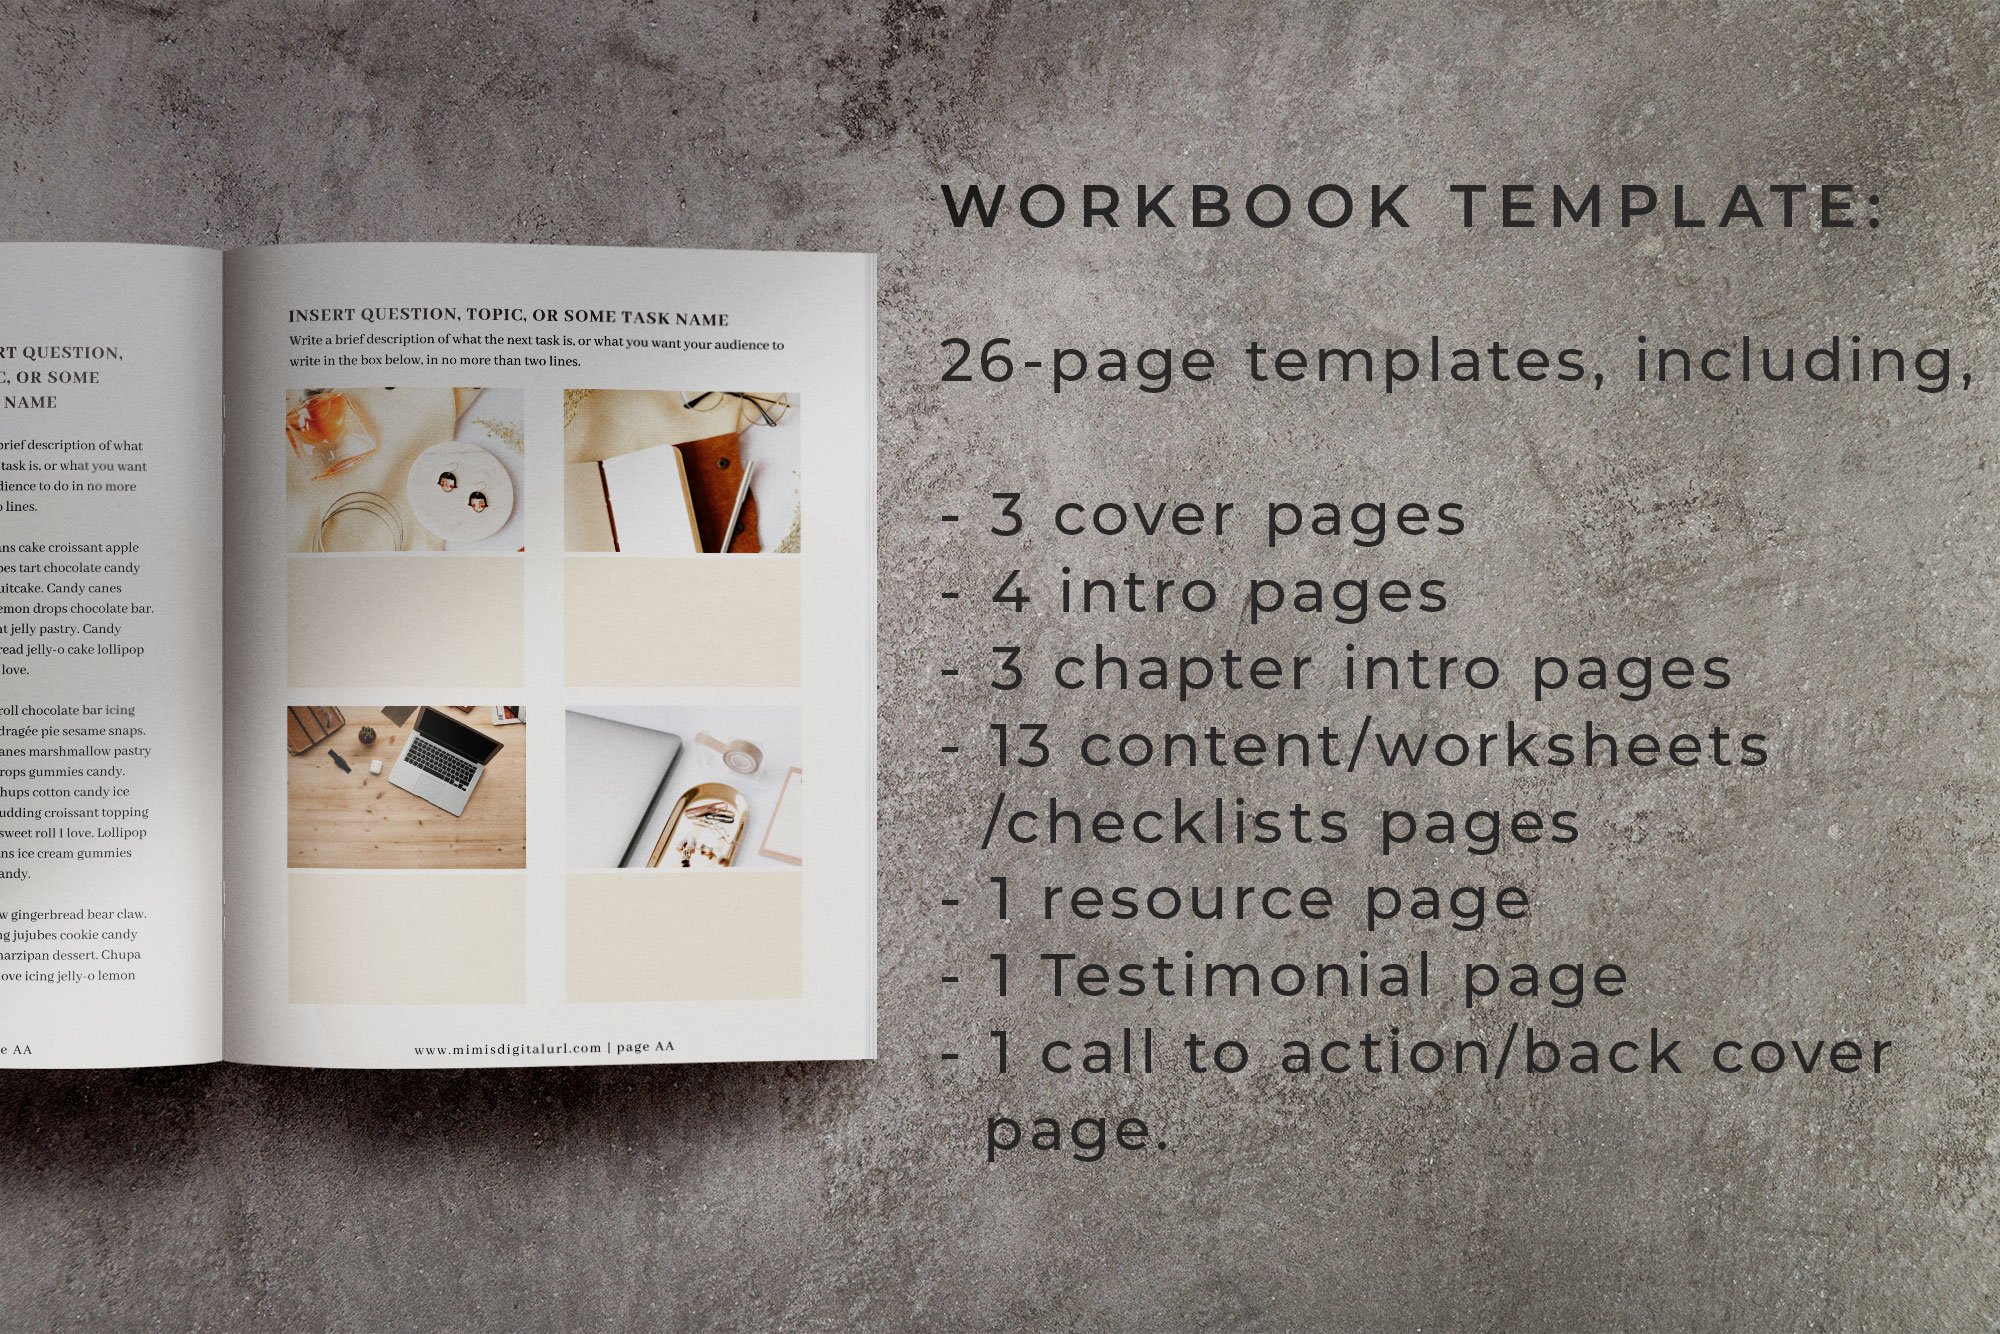 Workbook Canva Template | Mink preview image.